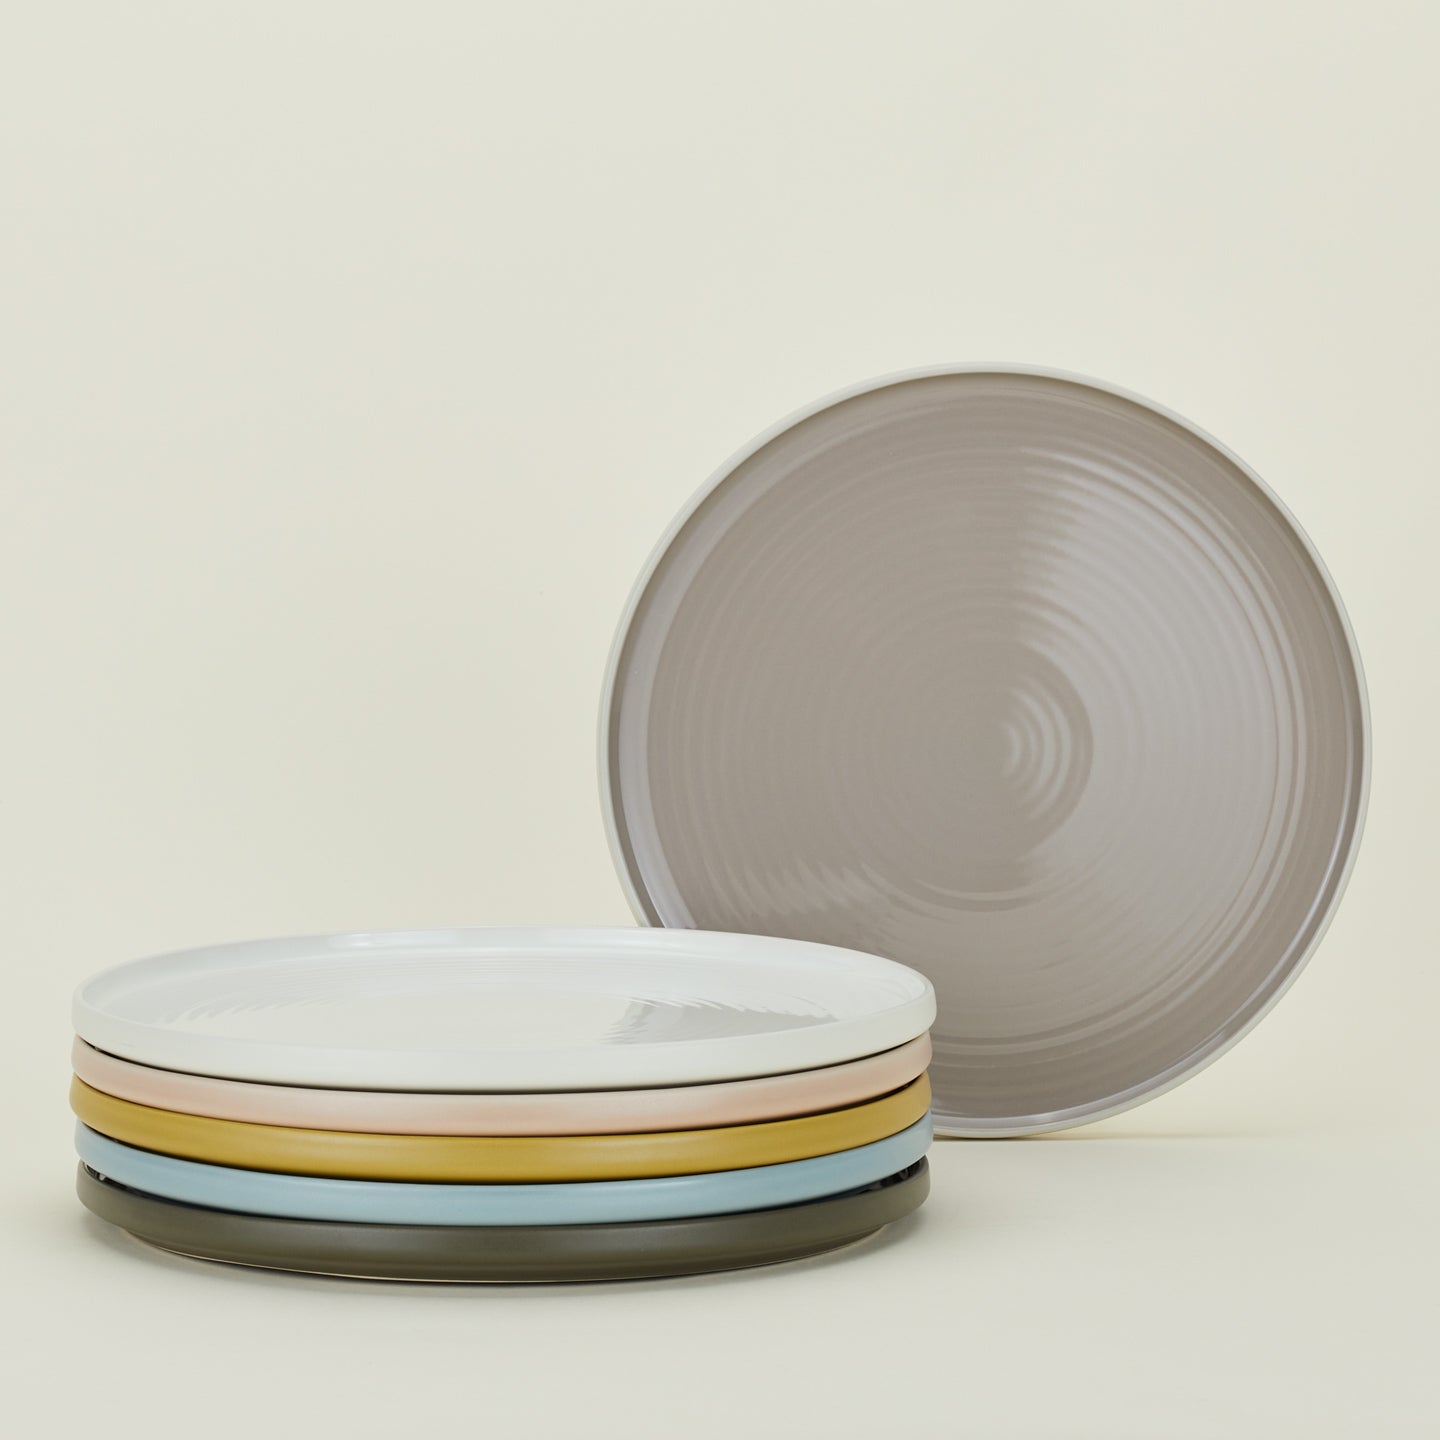 Group of Essential Dinner Plates in various colors.